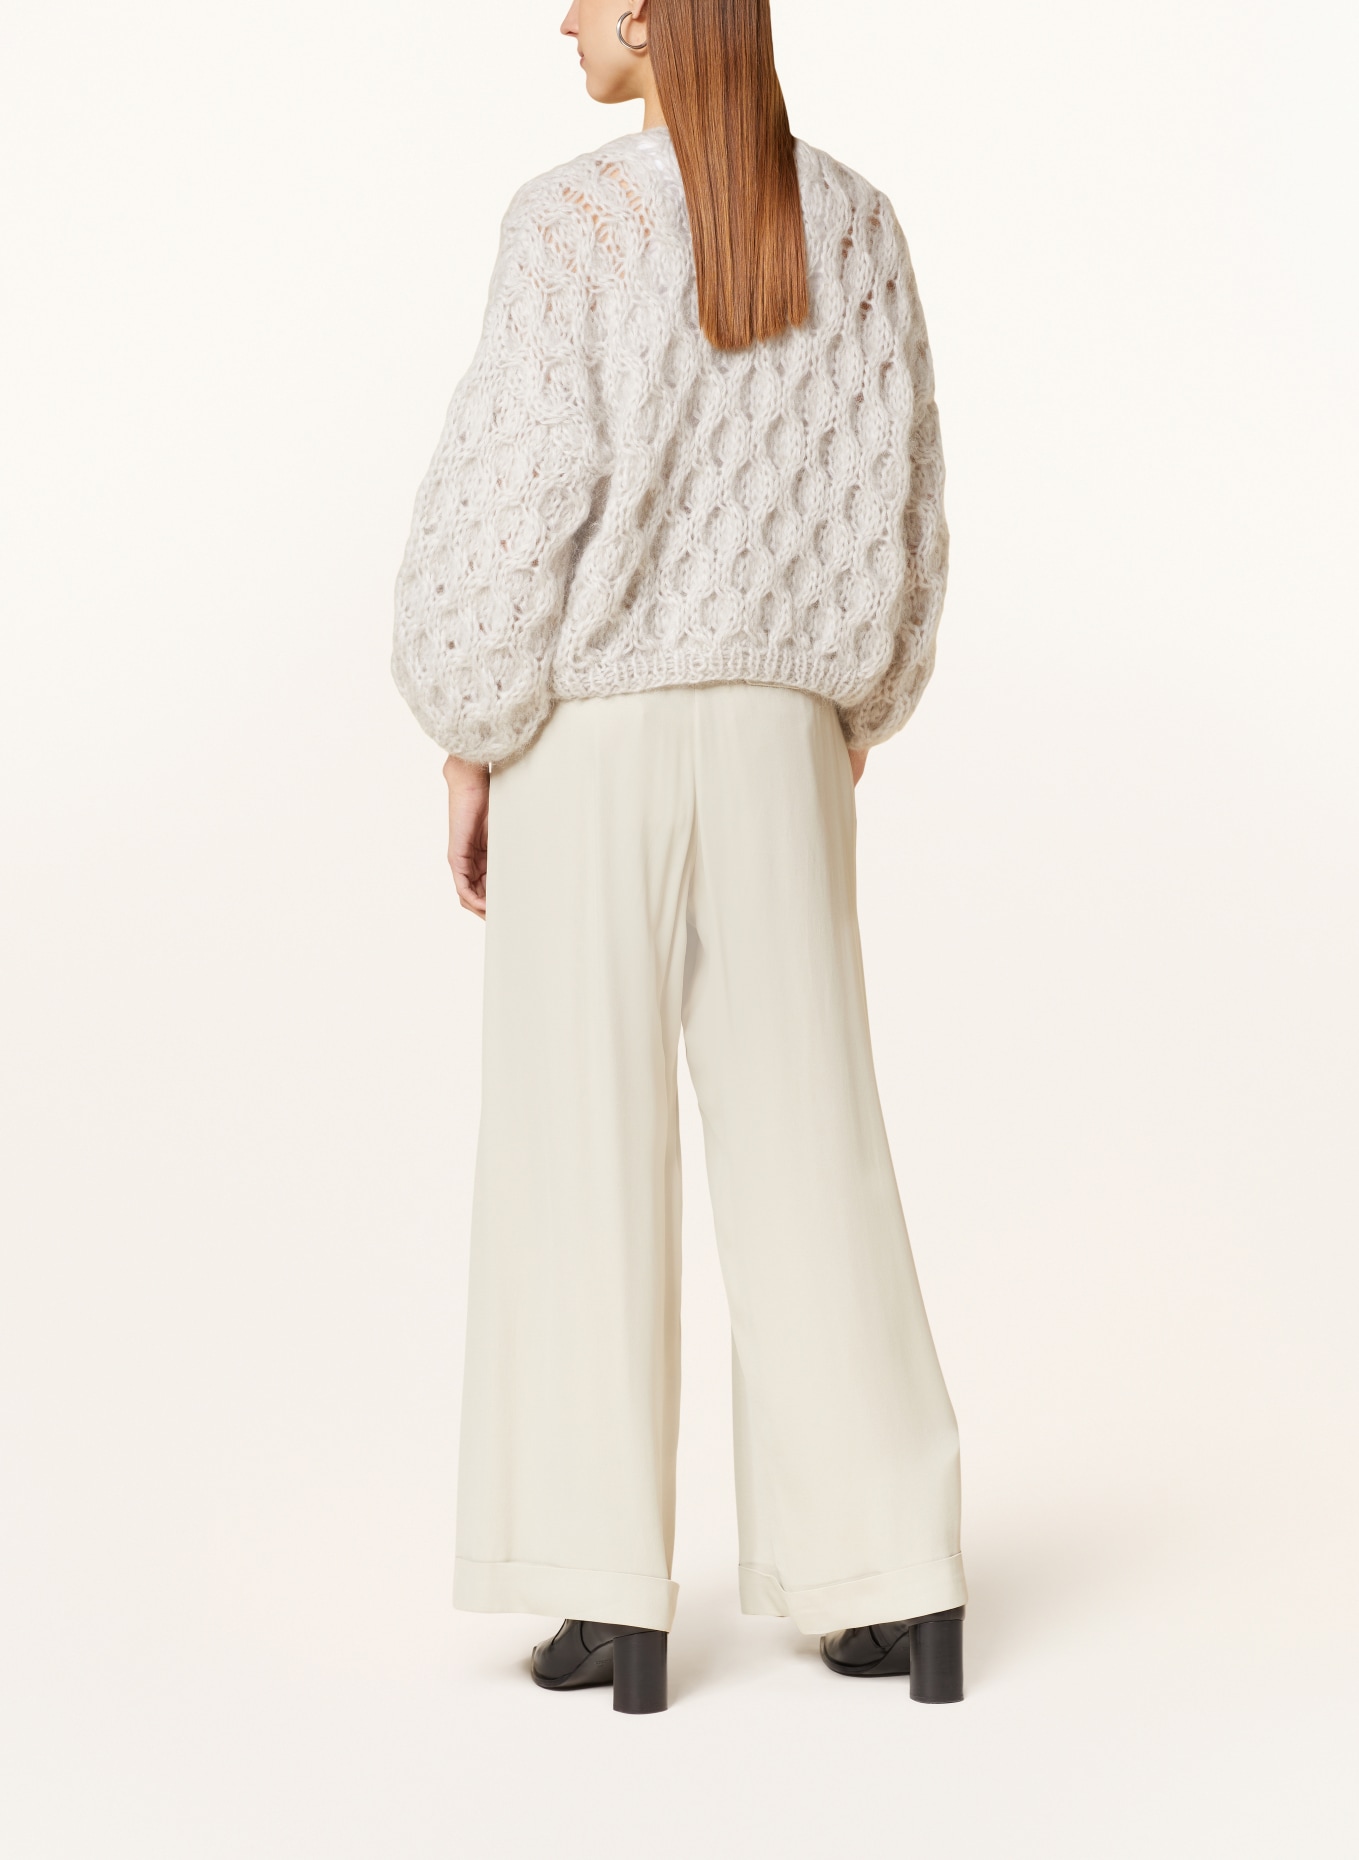 MAIAMI Knit cardigan made of mohair, Color: LIGHT GRAY (Image 3)